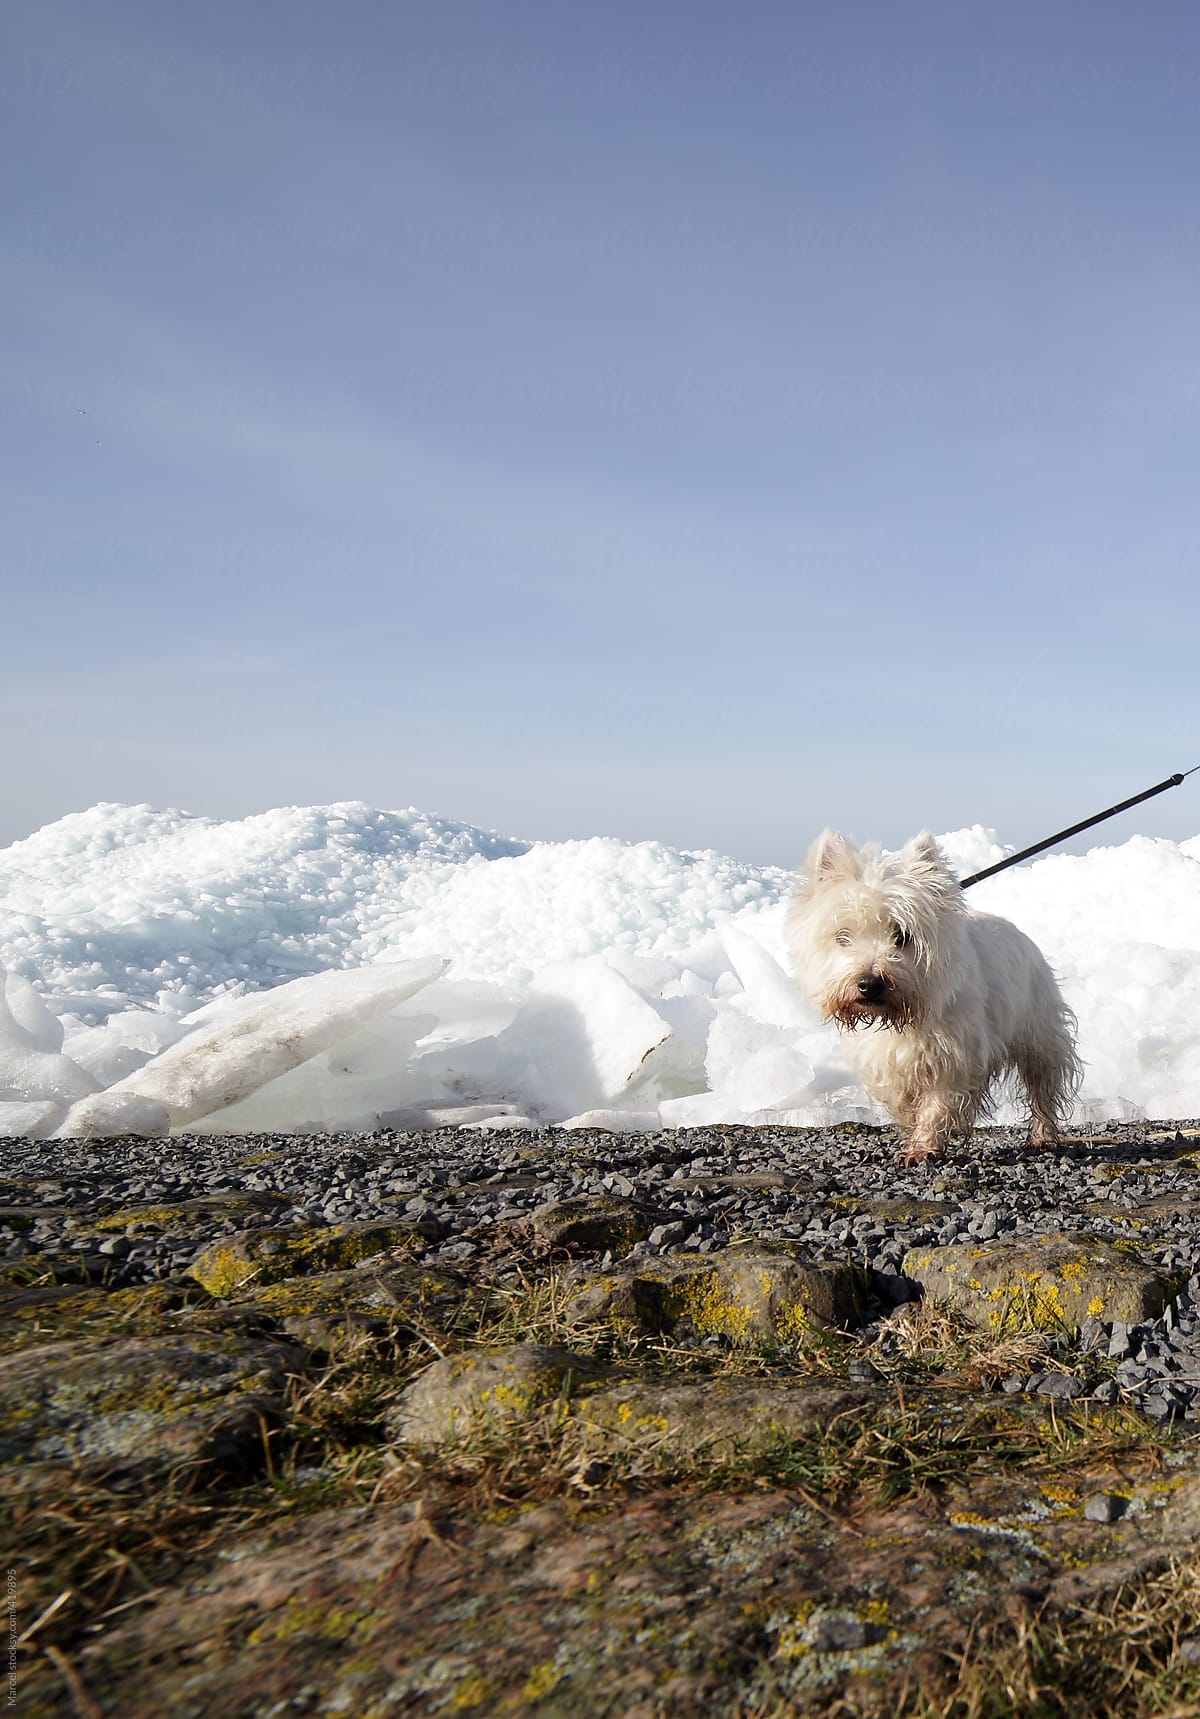 Terrier on a leash